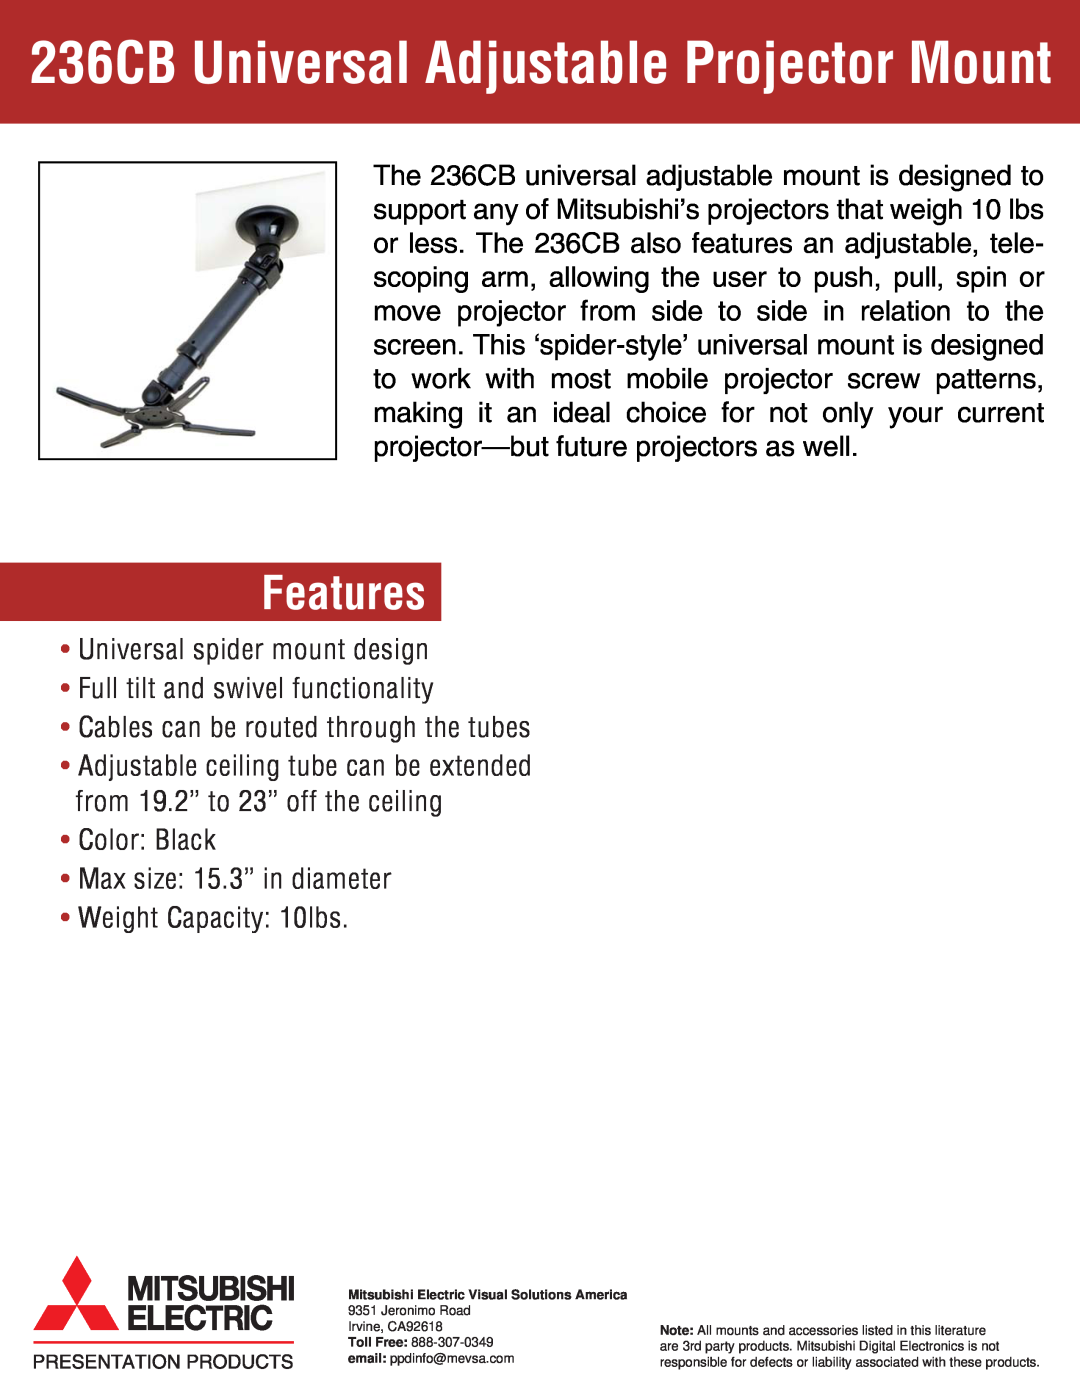 Mitsubishi manual Features, 236CB Universal Adjustable Projector Mount, Cables can be routed through the tubes 